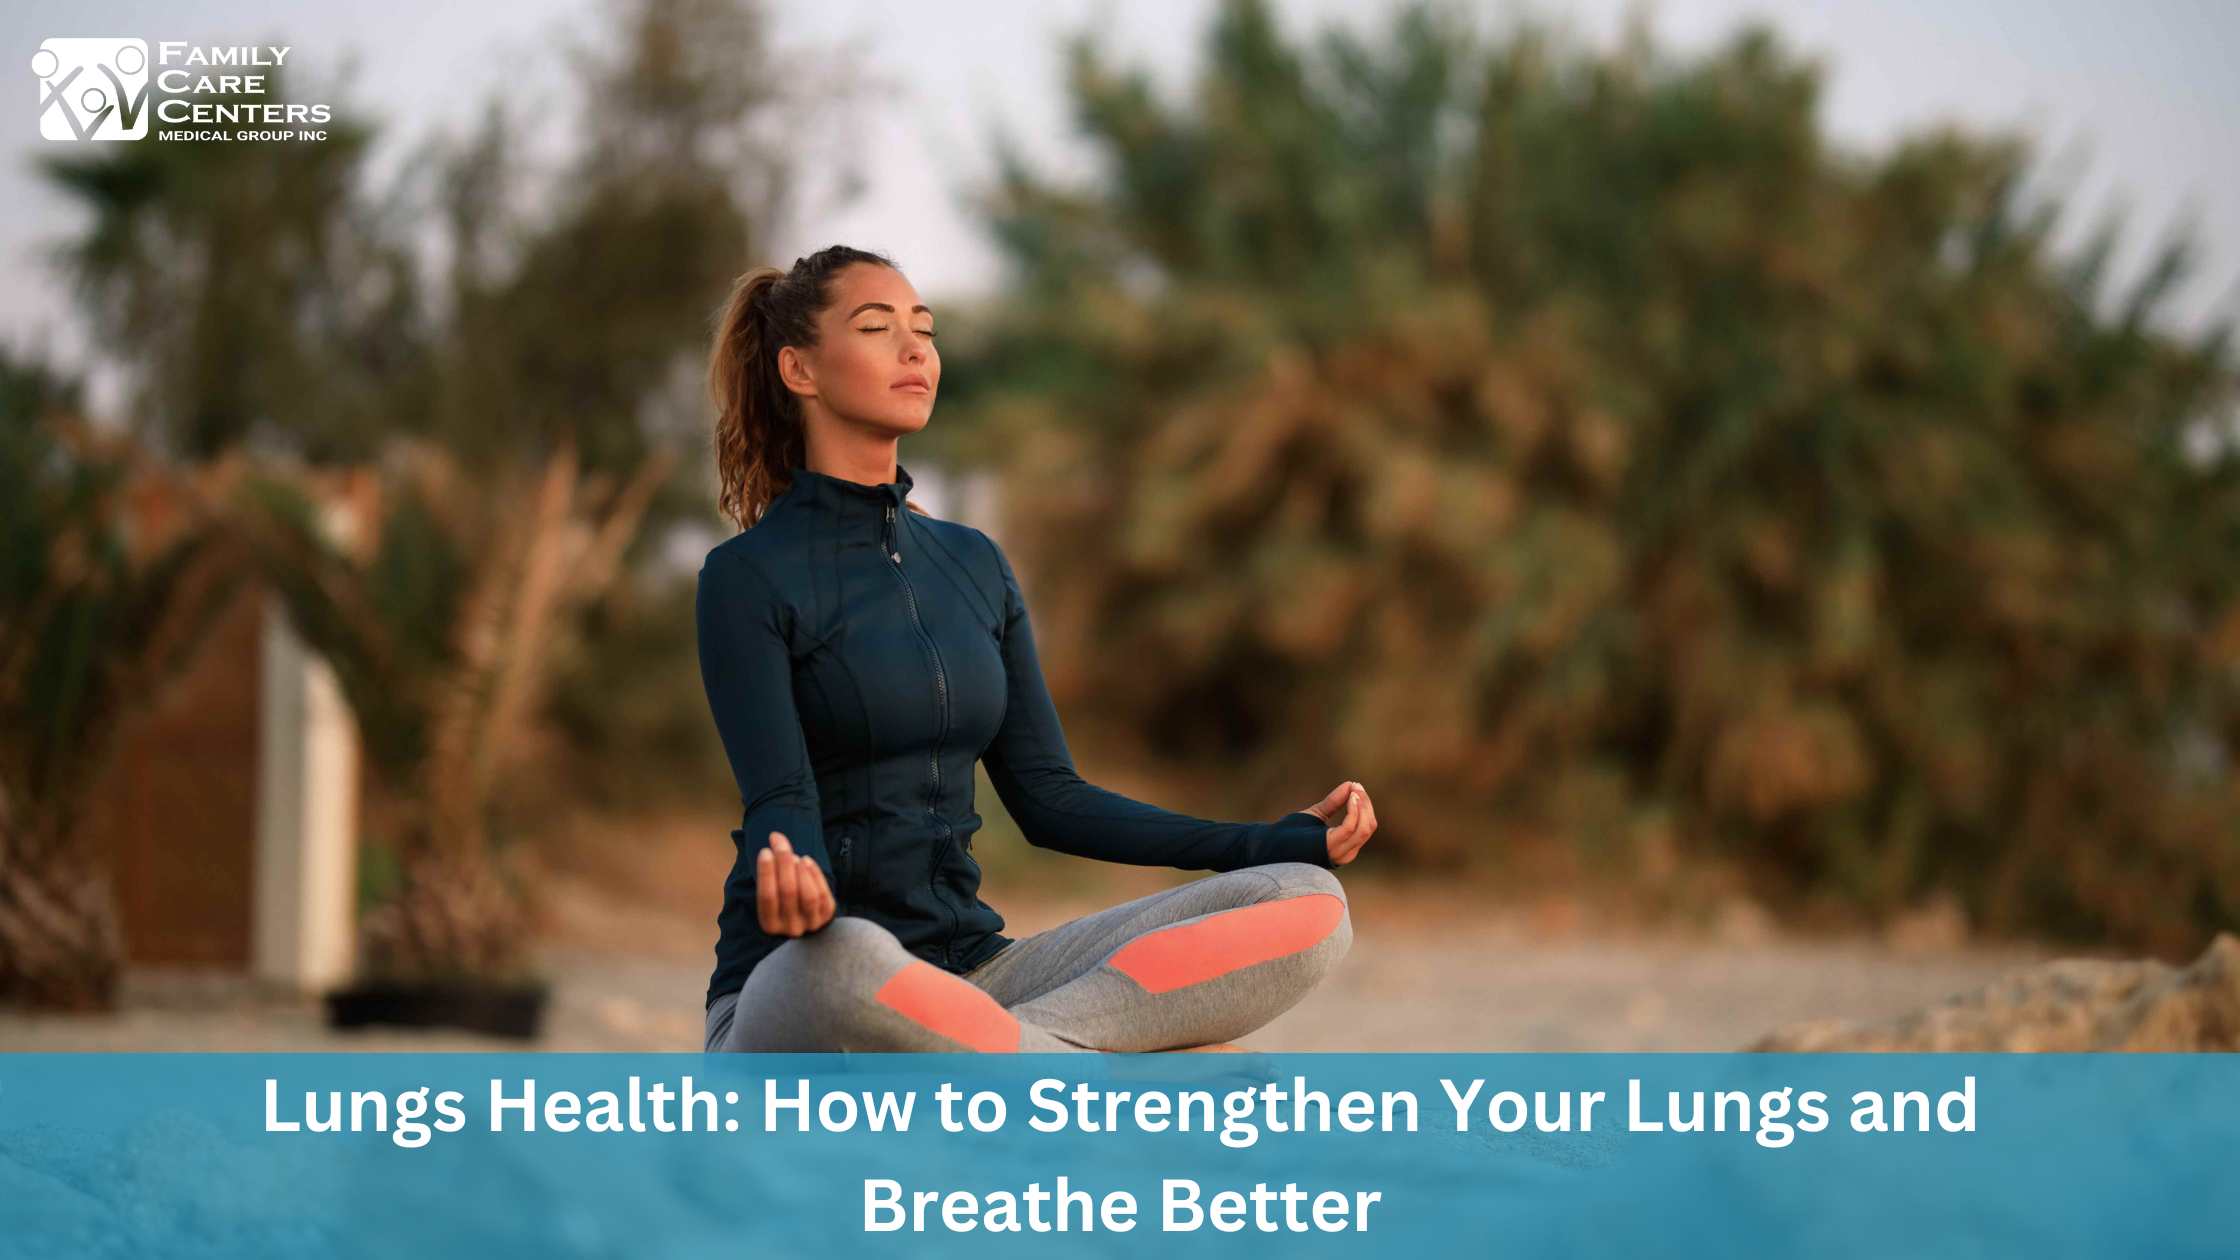 How to breathe better Breathing exercises to strengthen lungs